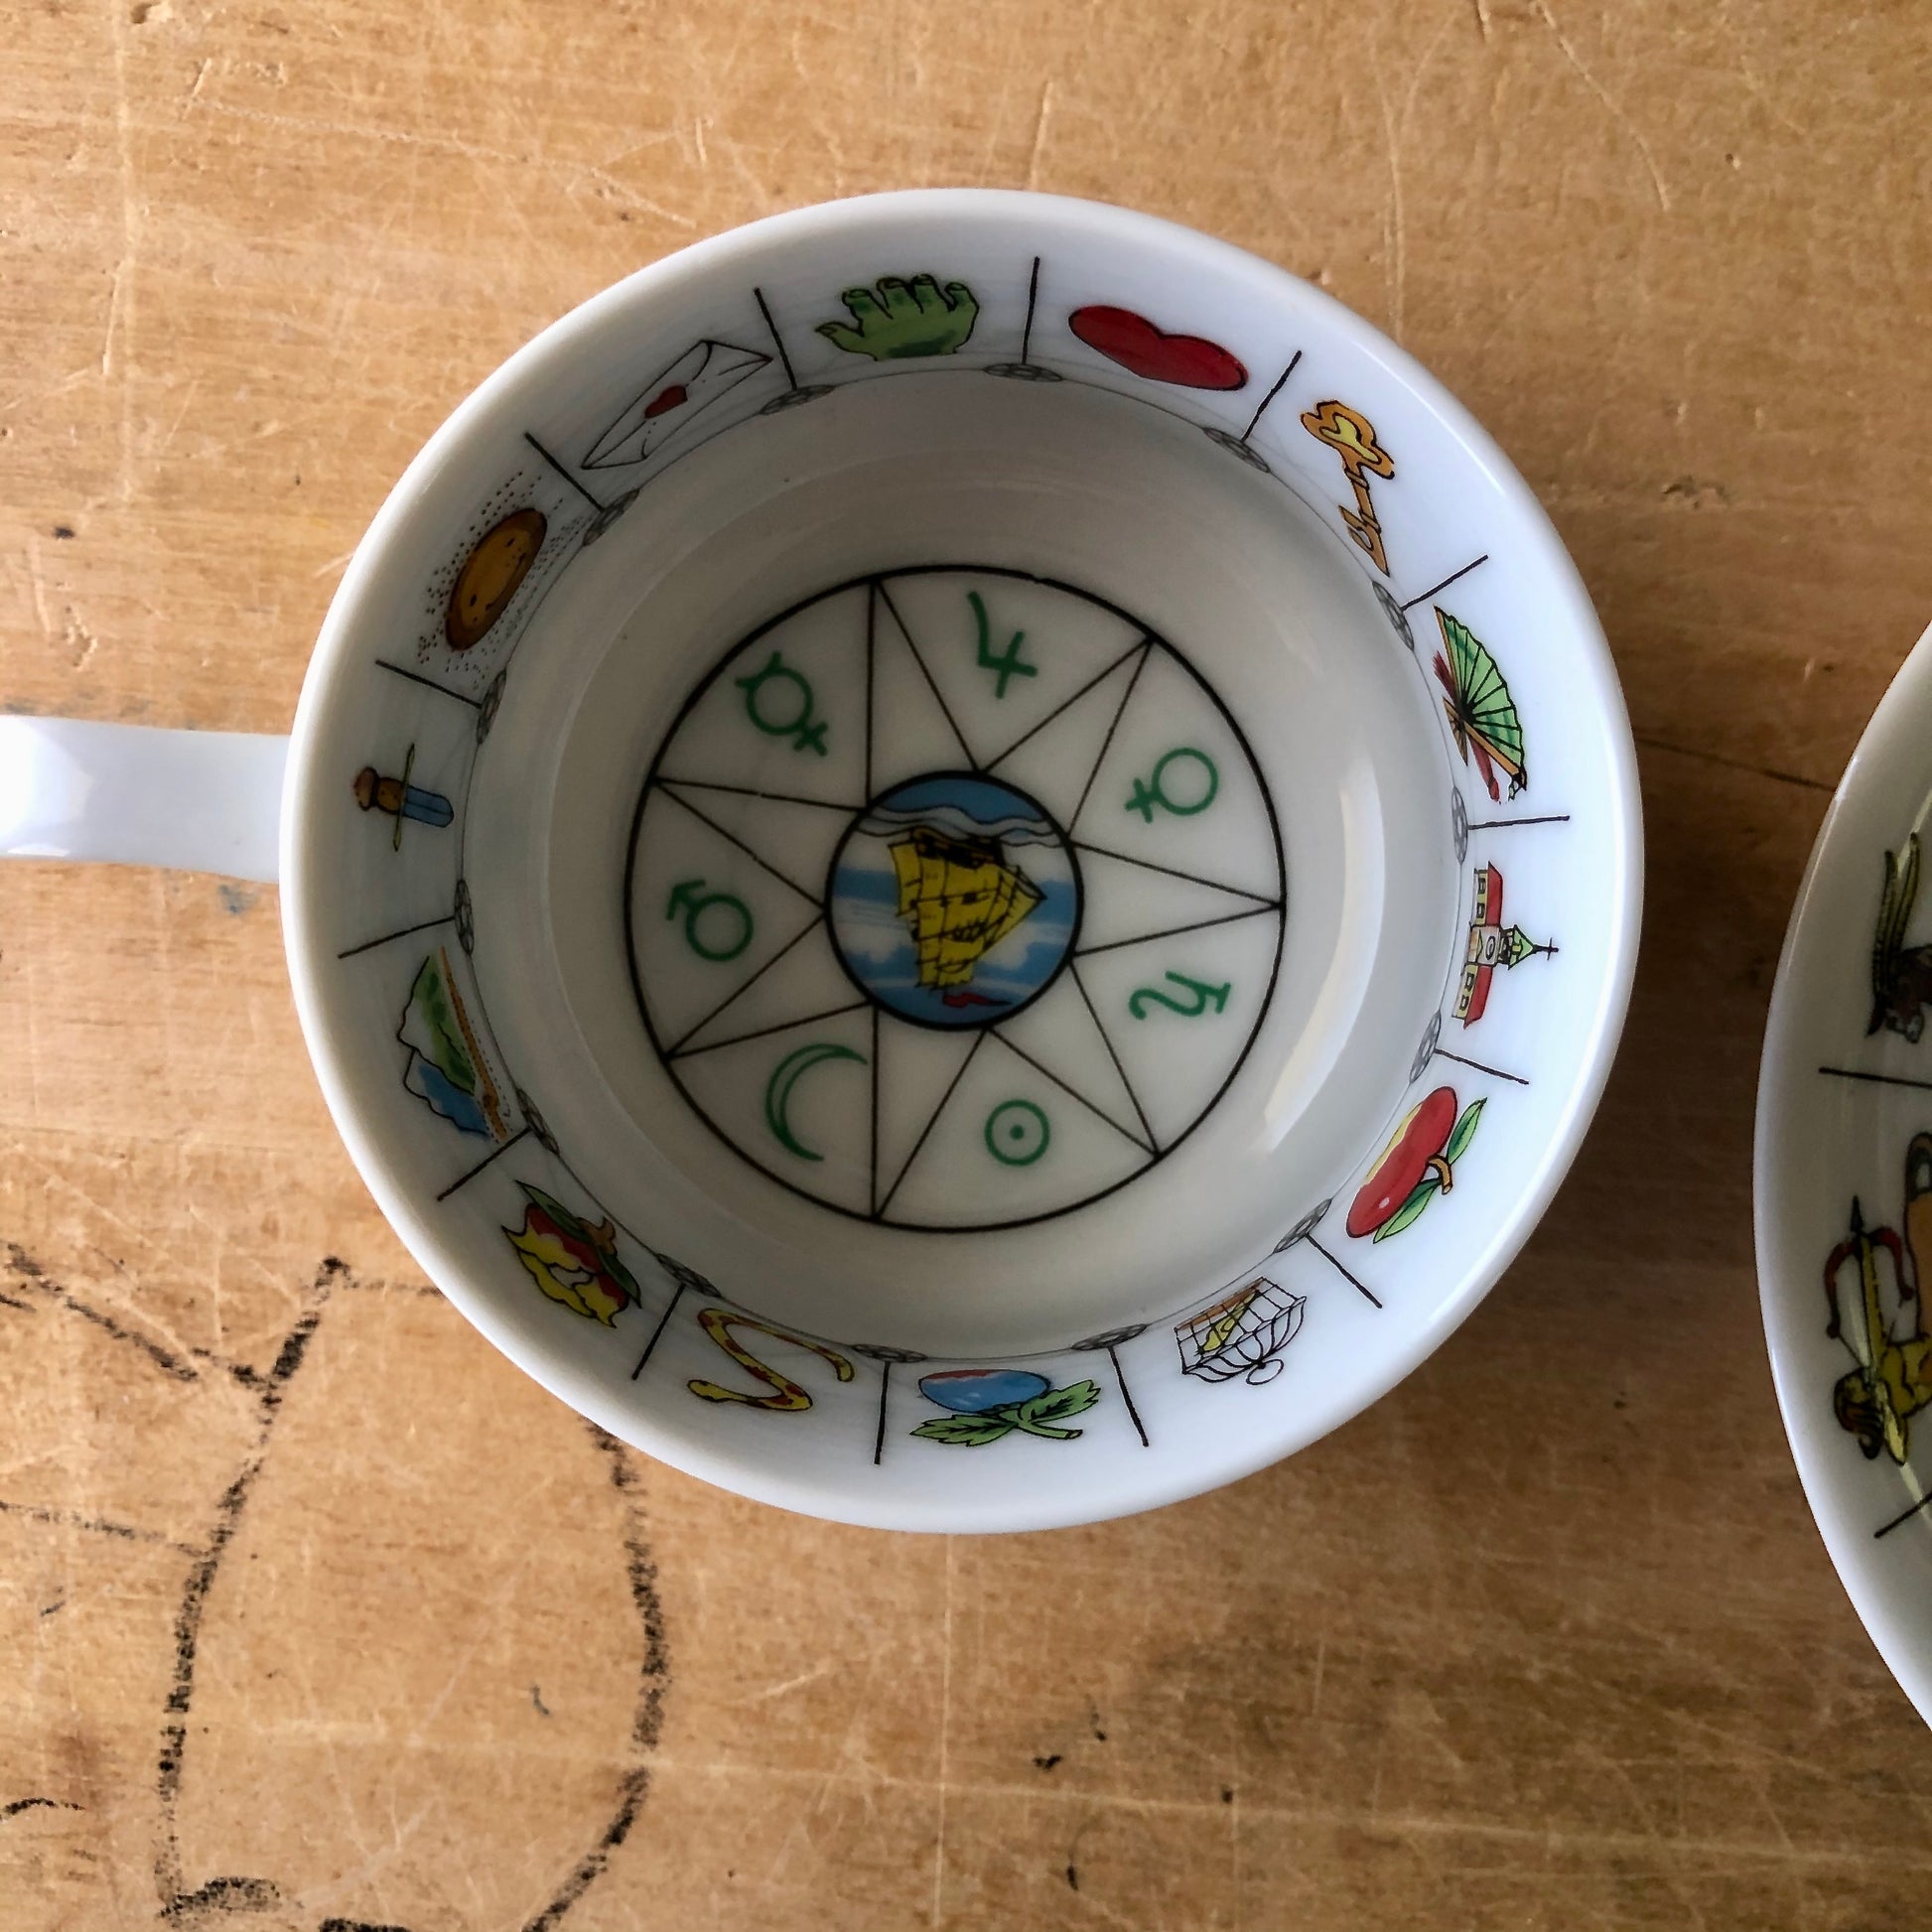 Vintage Fortune Teller's Astrology Tea Cup and Saucer (c.1970s)